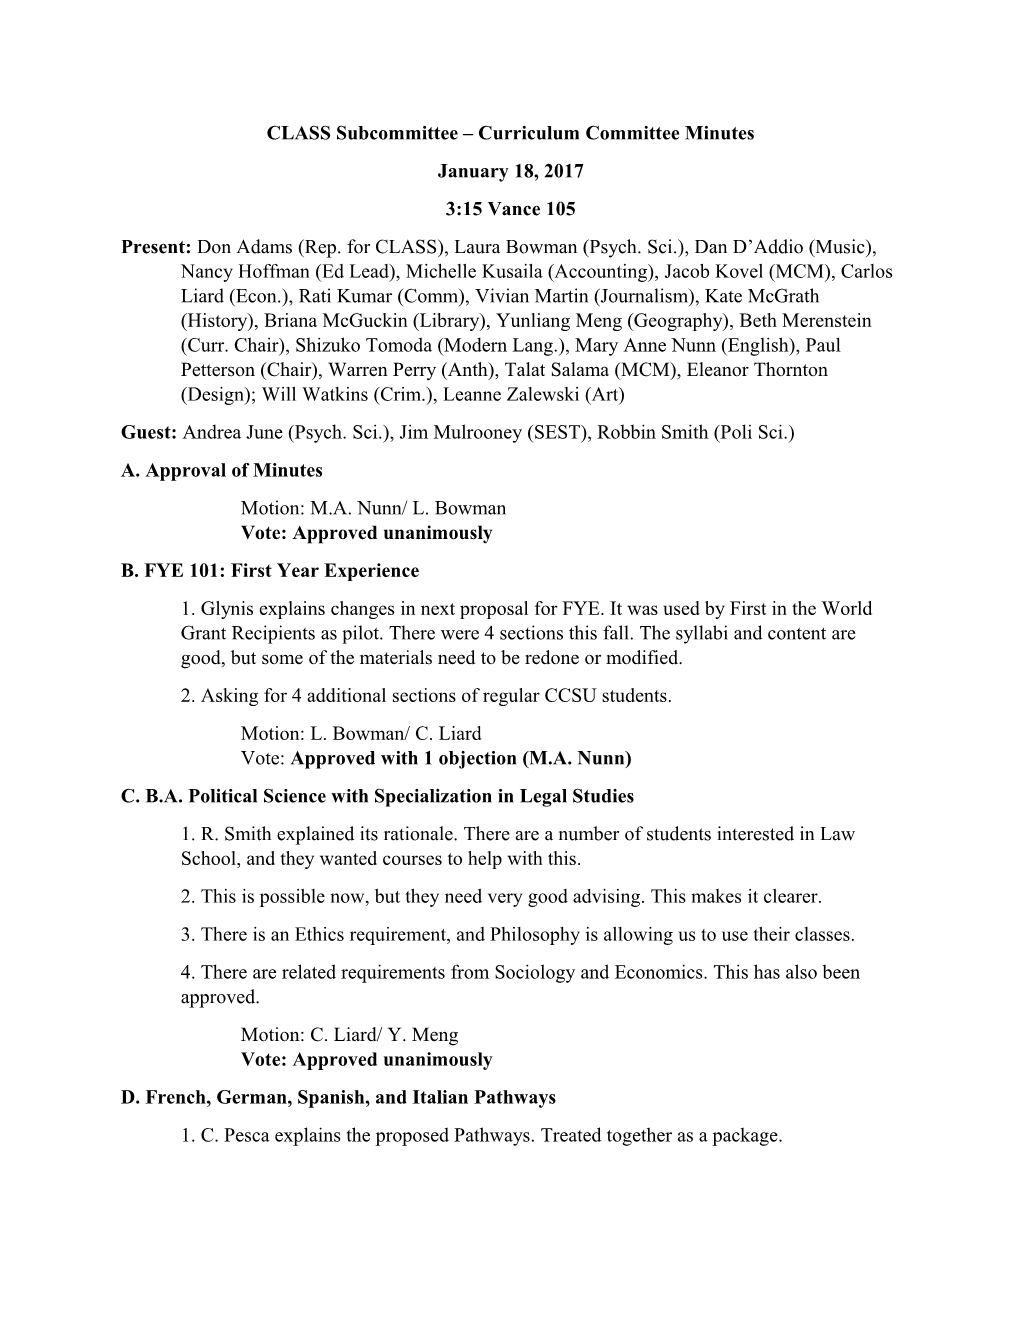 CLASS Subcommittee Curriculum Committee Minutes